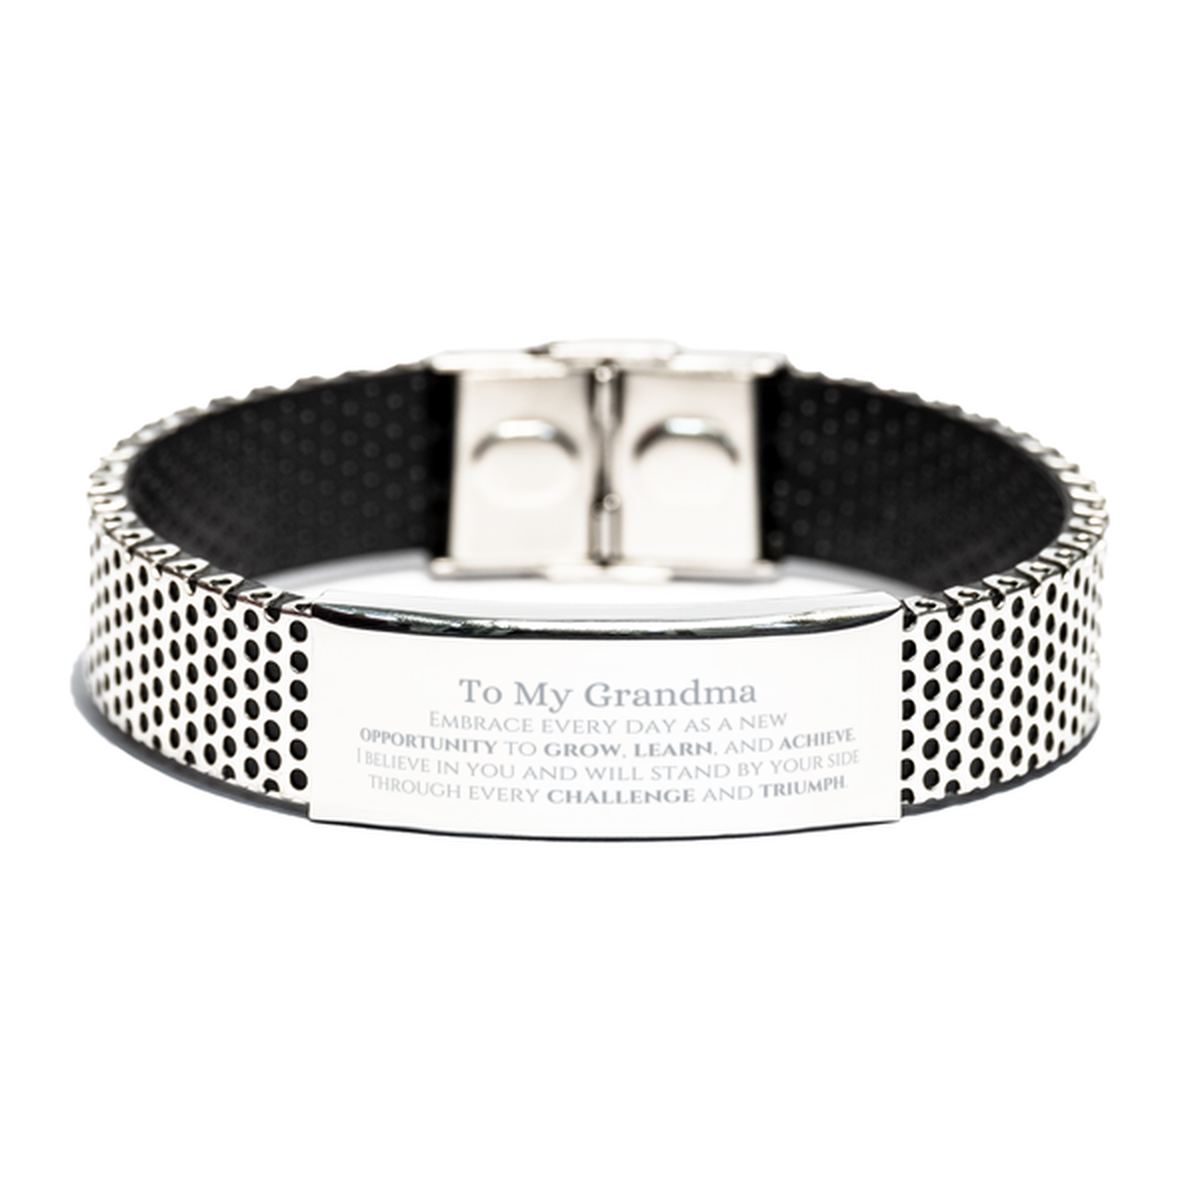 To My Grandma Gifts, I believe in you and will stand by your side, Inspirational Stainless Steel Bracelet For Grandma, Birthday Christmas Motivational Grandma Gifts